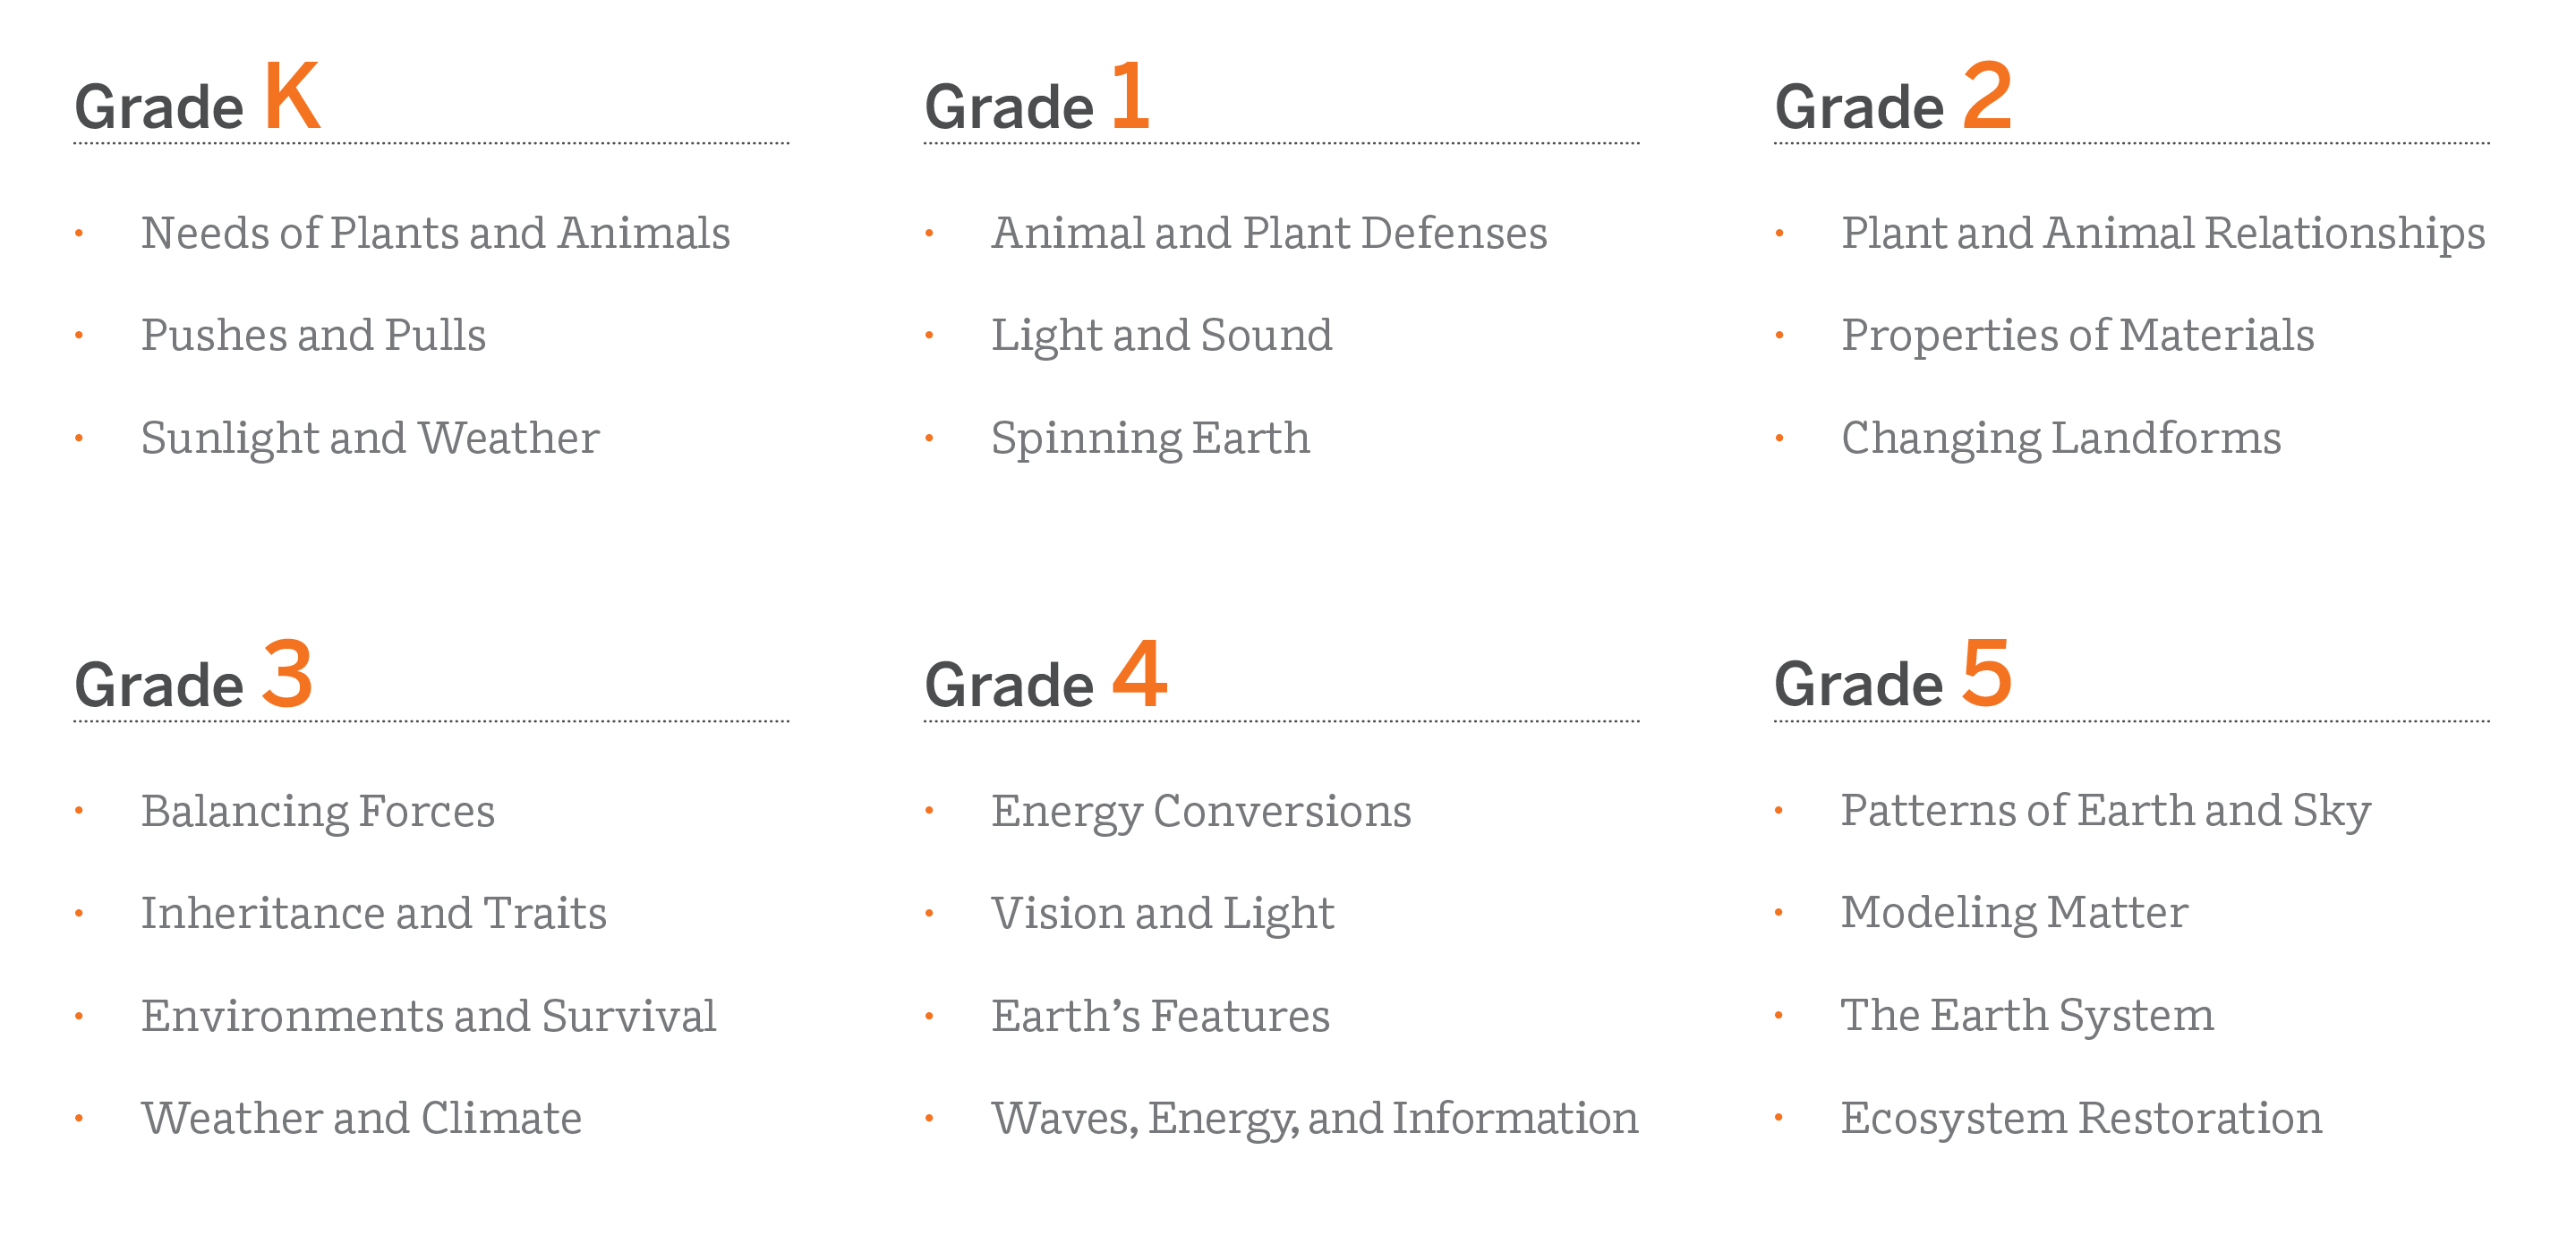 Chart outlining science curriculum by grade, from kindergarten through grade 5, listing topics such as 